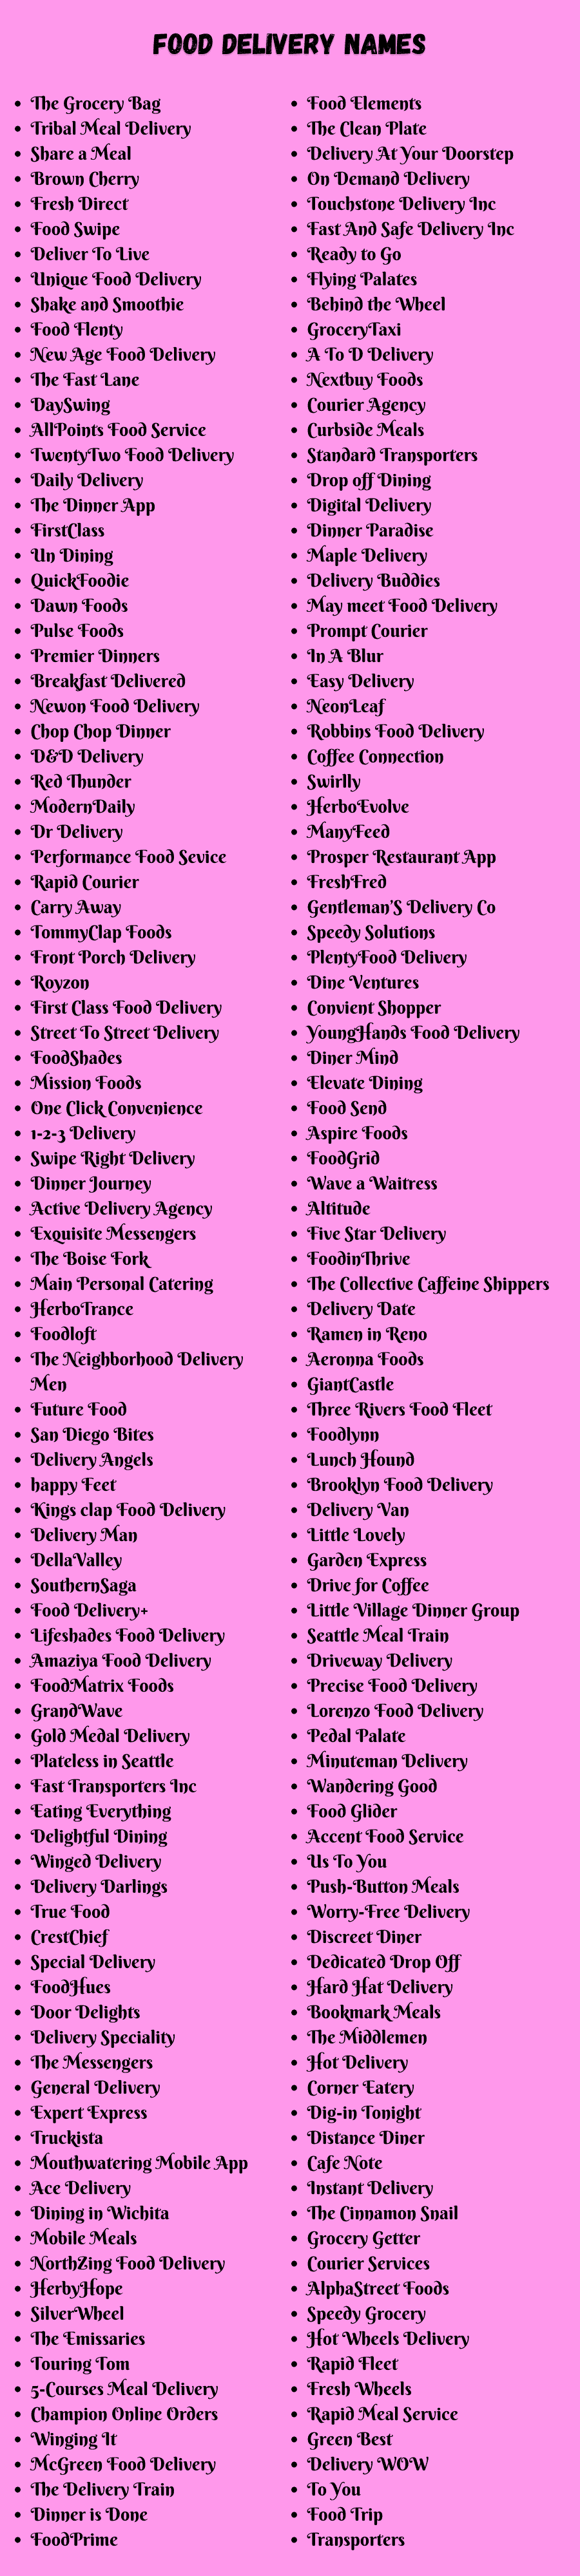 Food Delivery Names